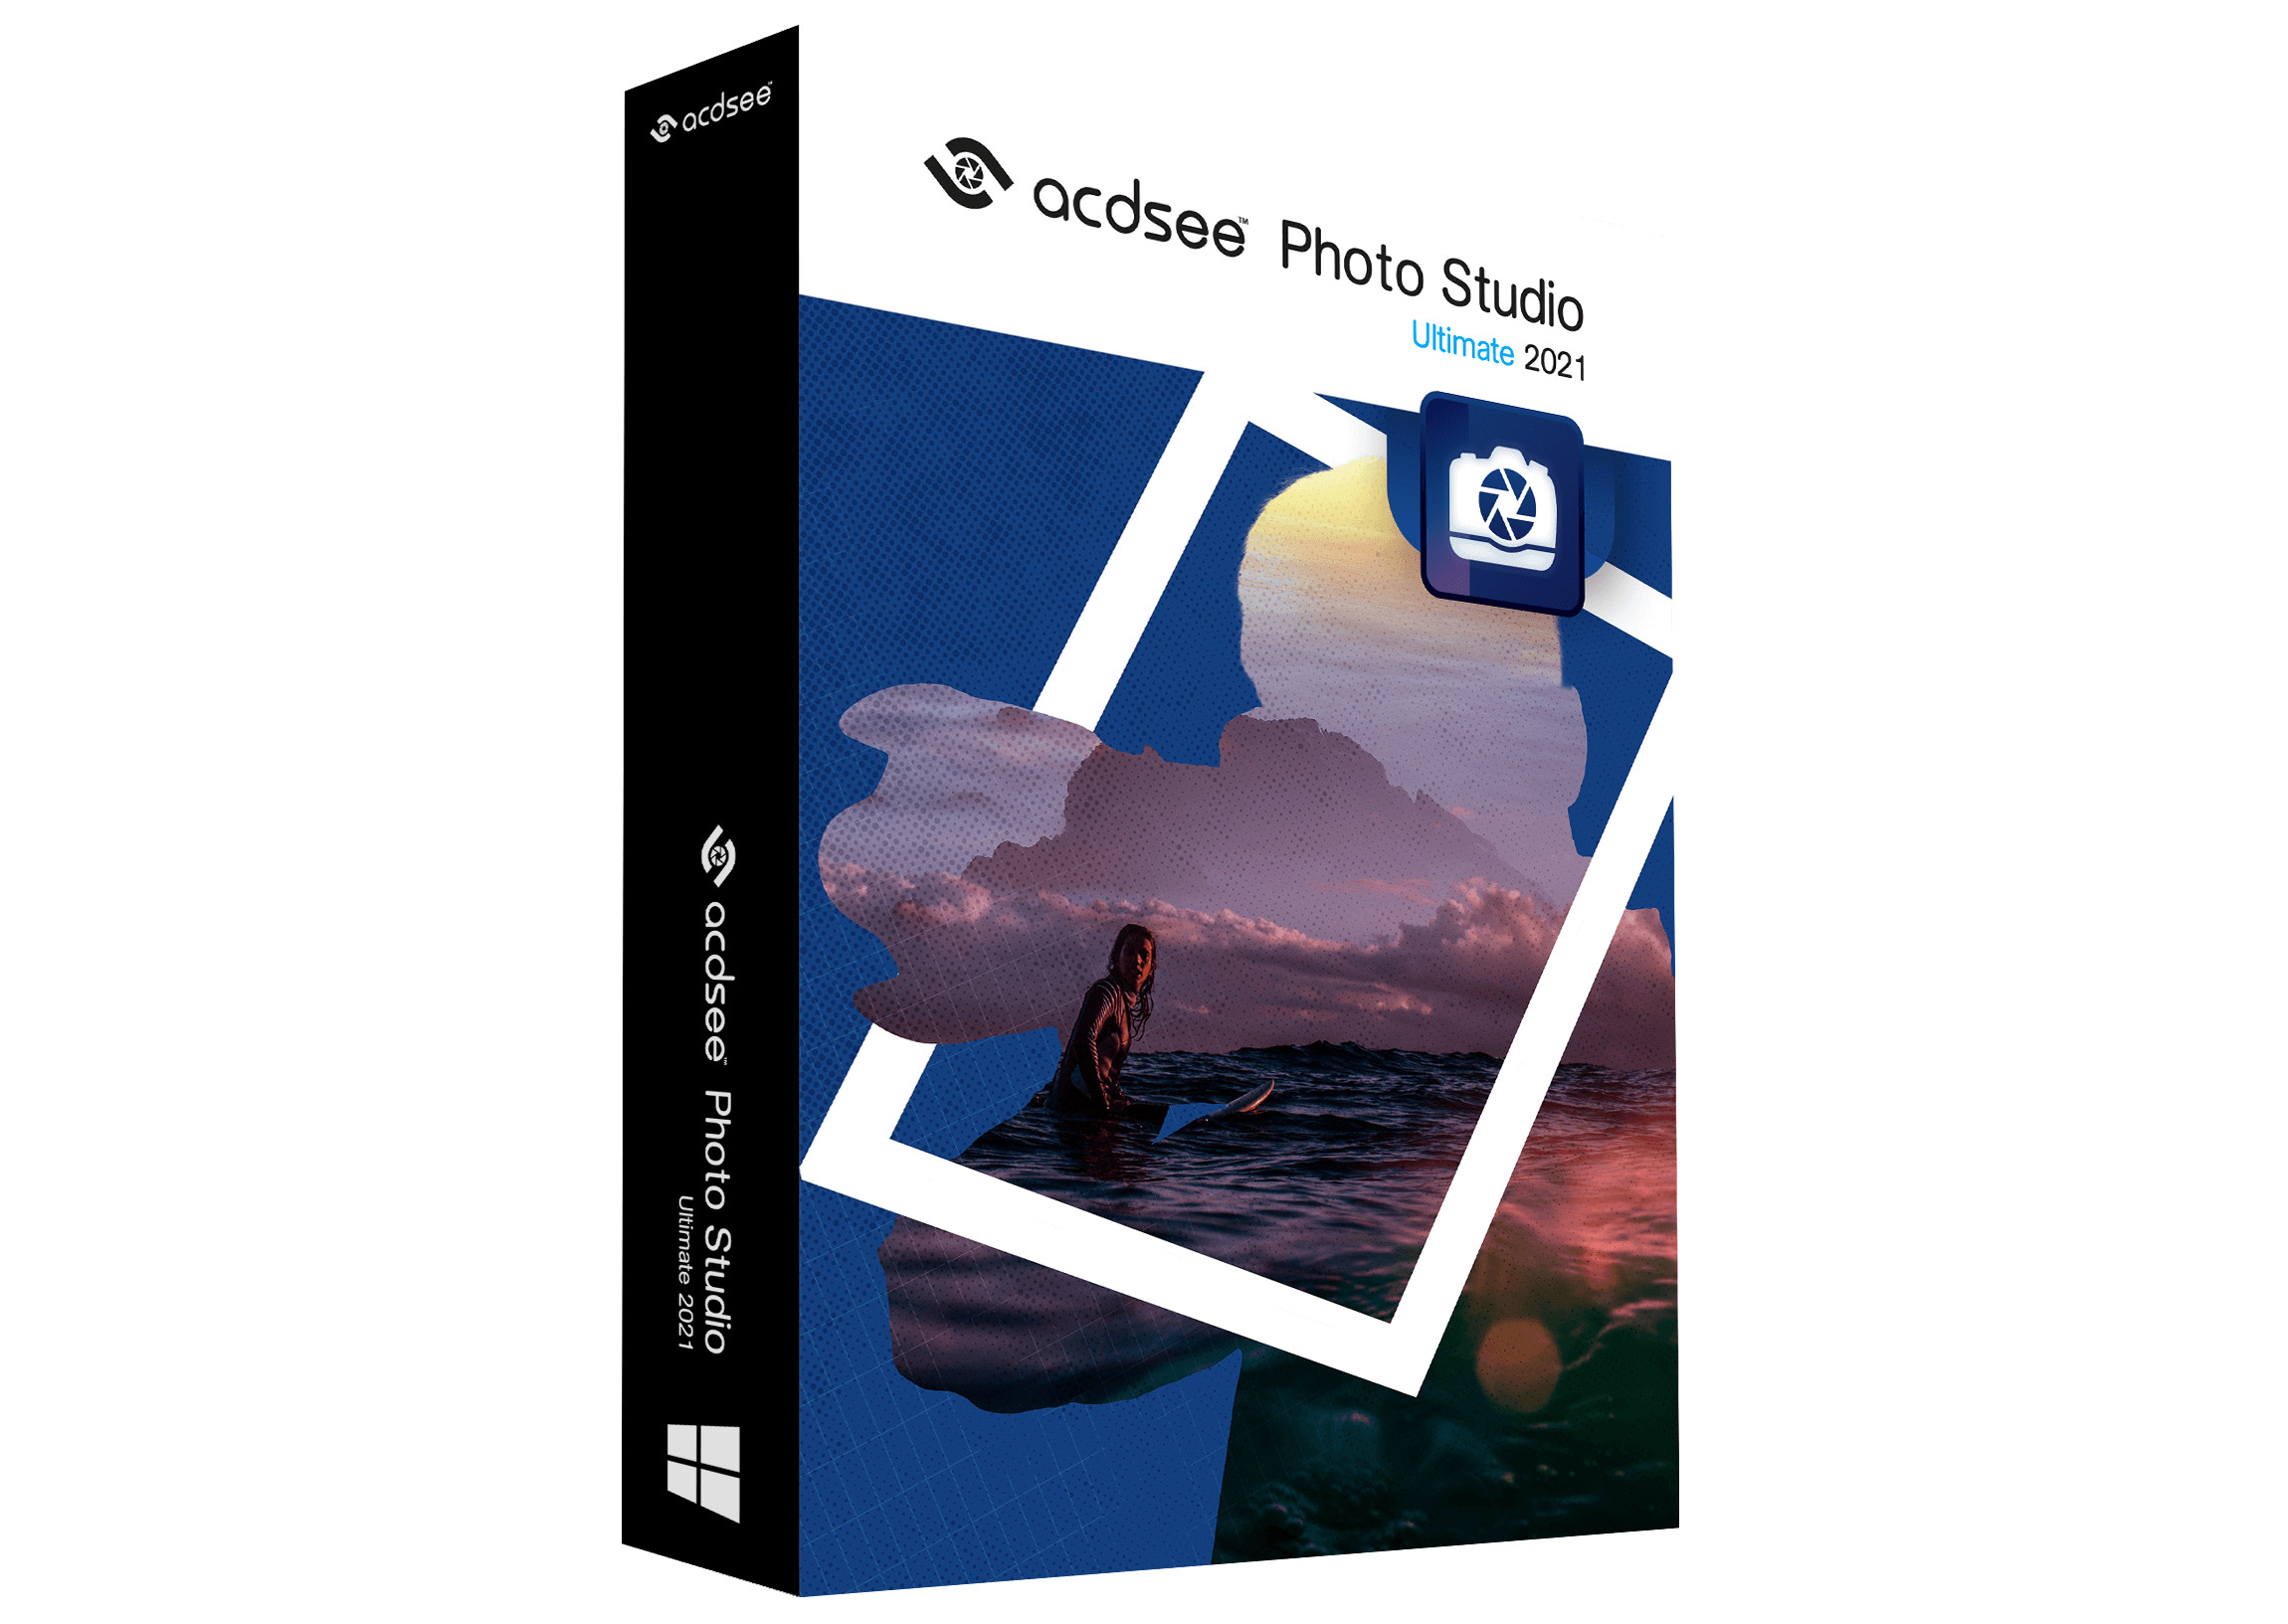 ACDSee Photo Studio Ultimate 2021 Key (6 Months / 1 PC), $11.29